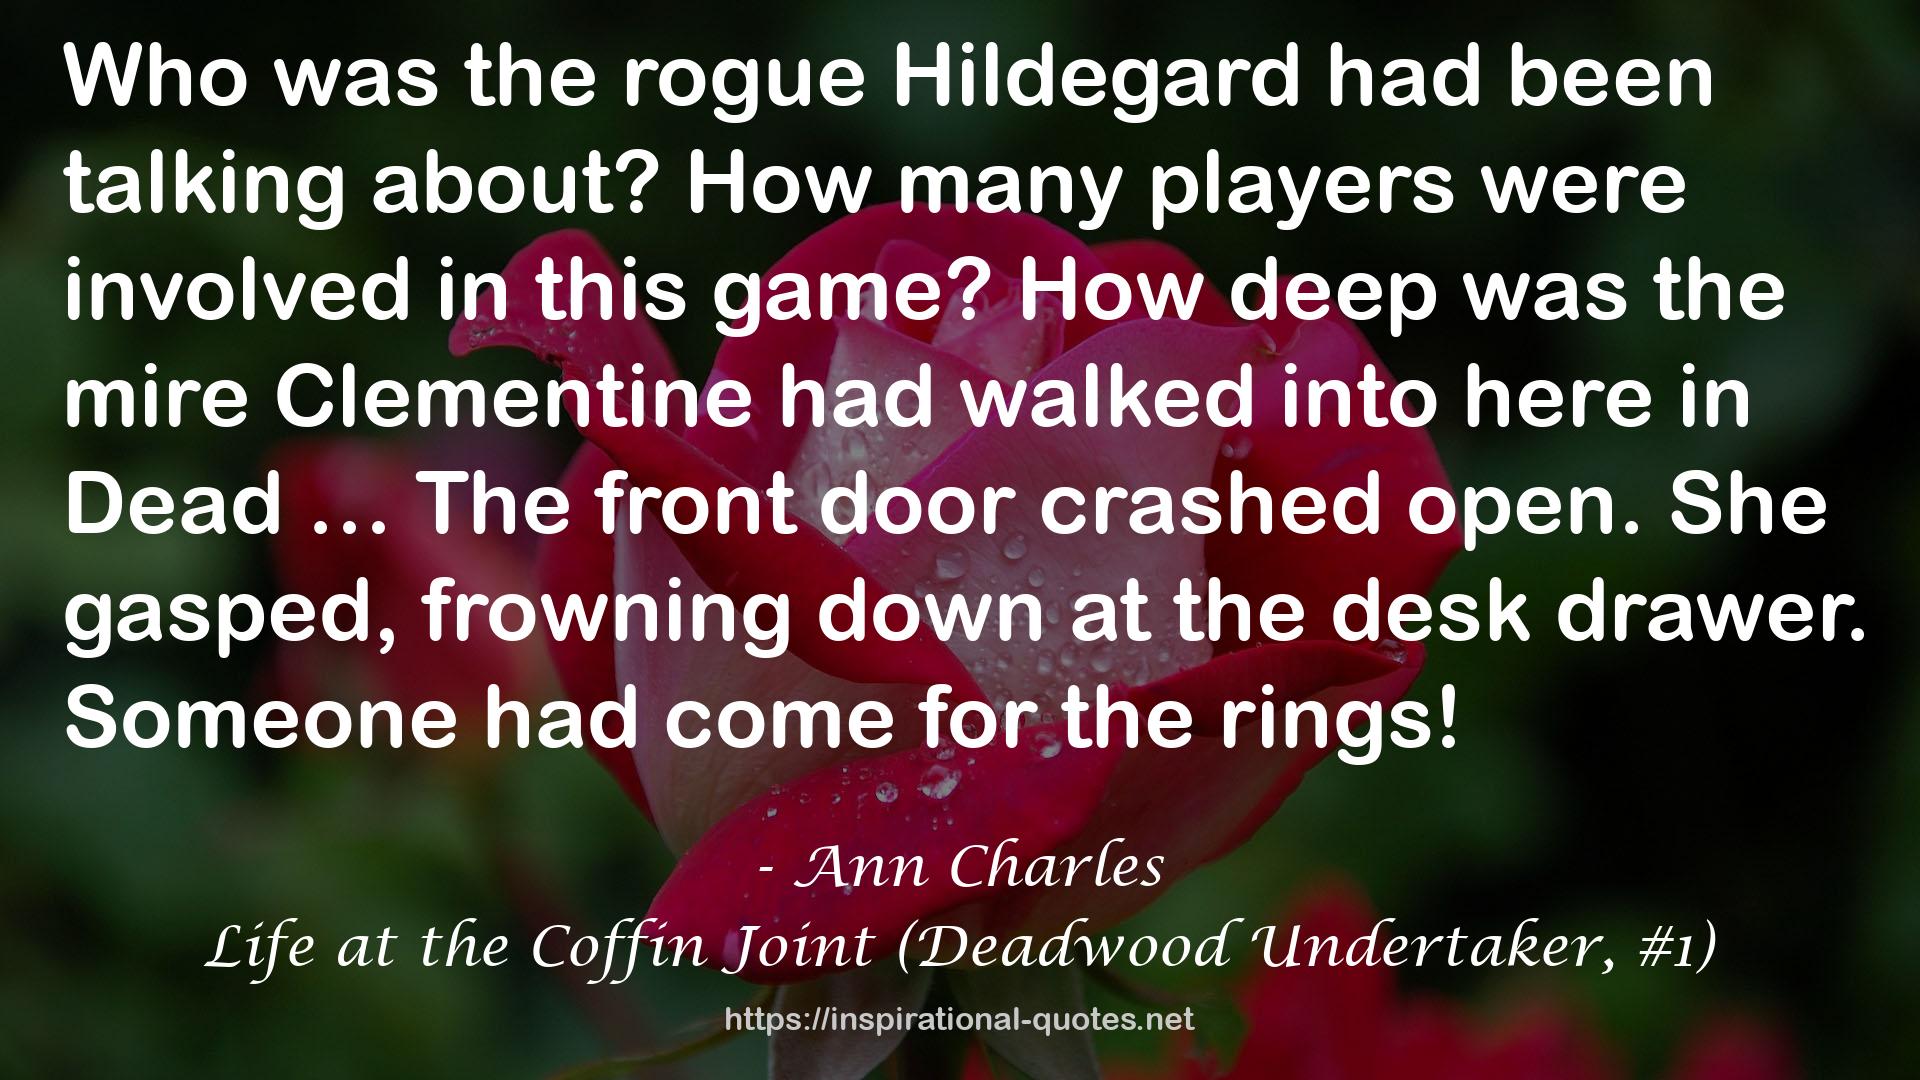 Life at the Coffin Joint (Deadwood Undertaker, #1) QUOTES